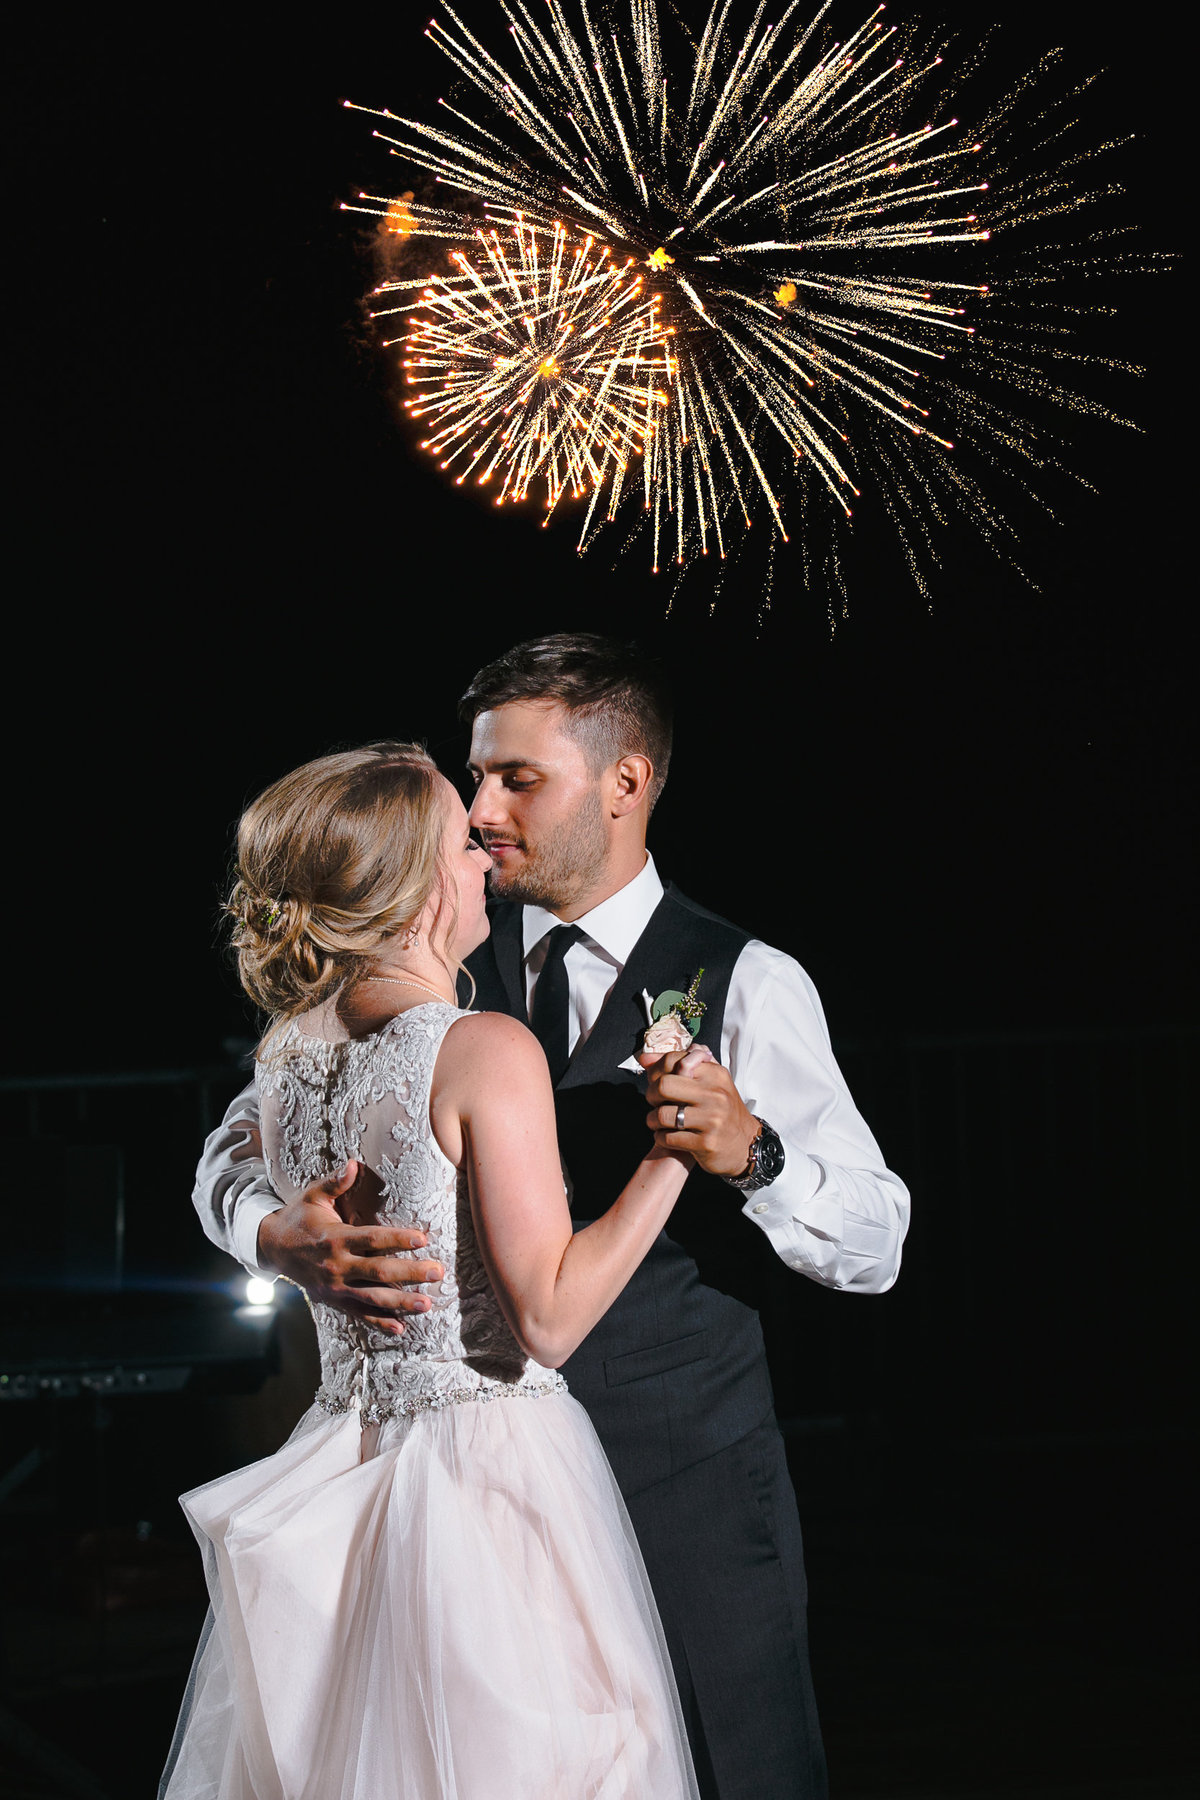 Bride and Groom share their first dance under a night sky filled with fireworks.